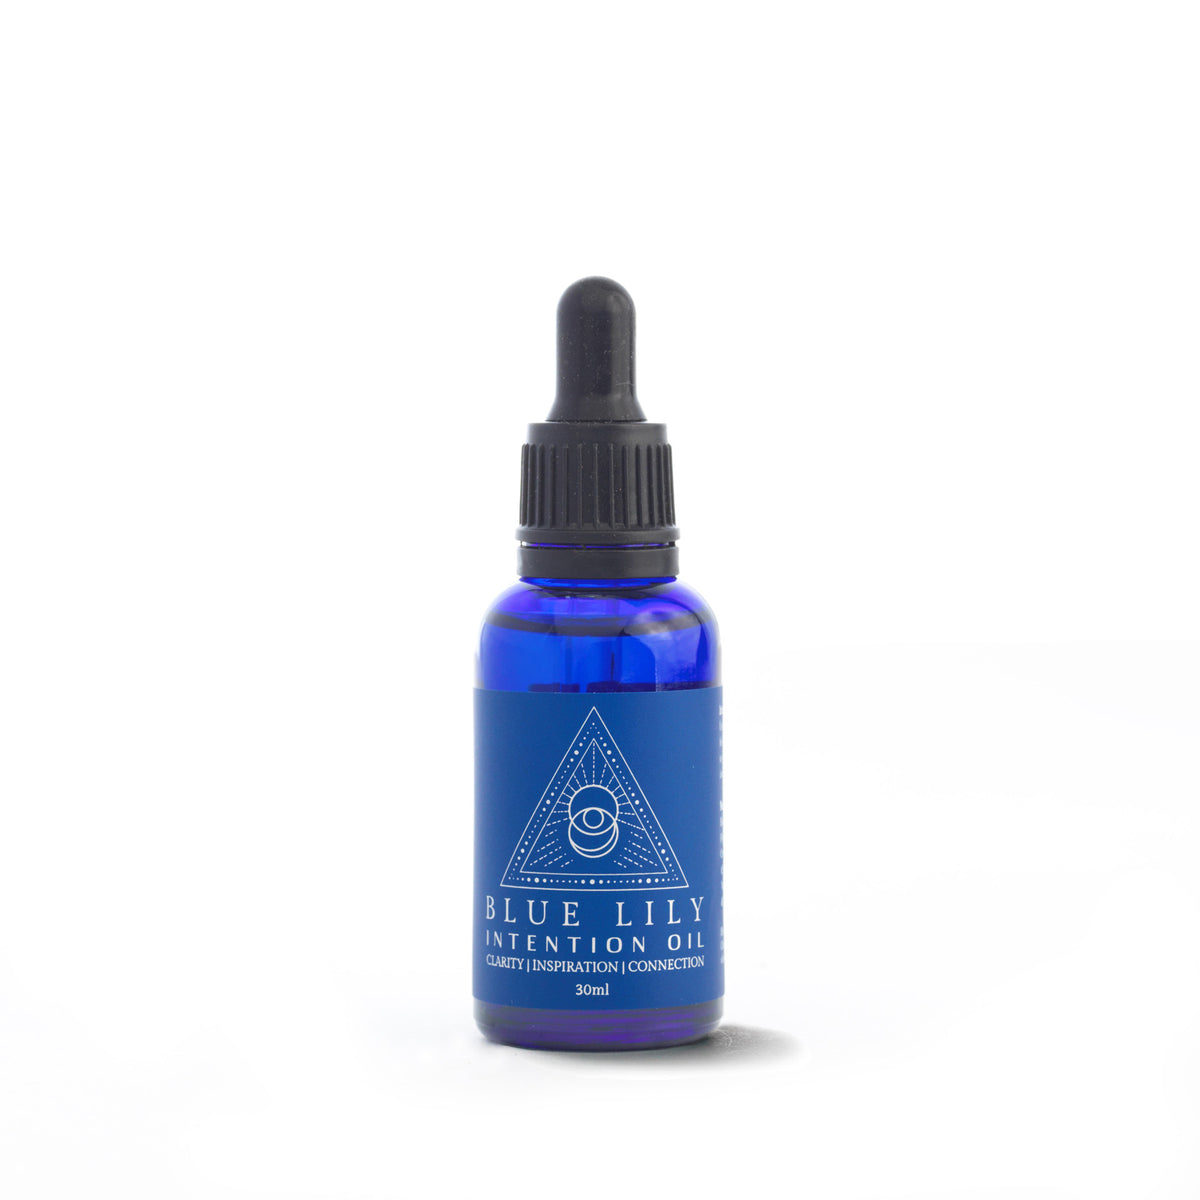 Blue Lily Intention Oil